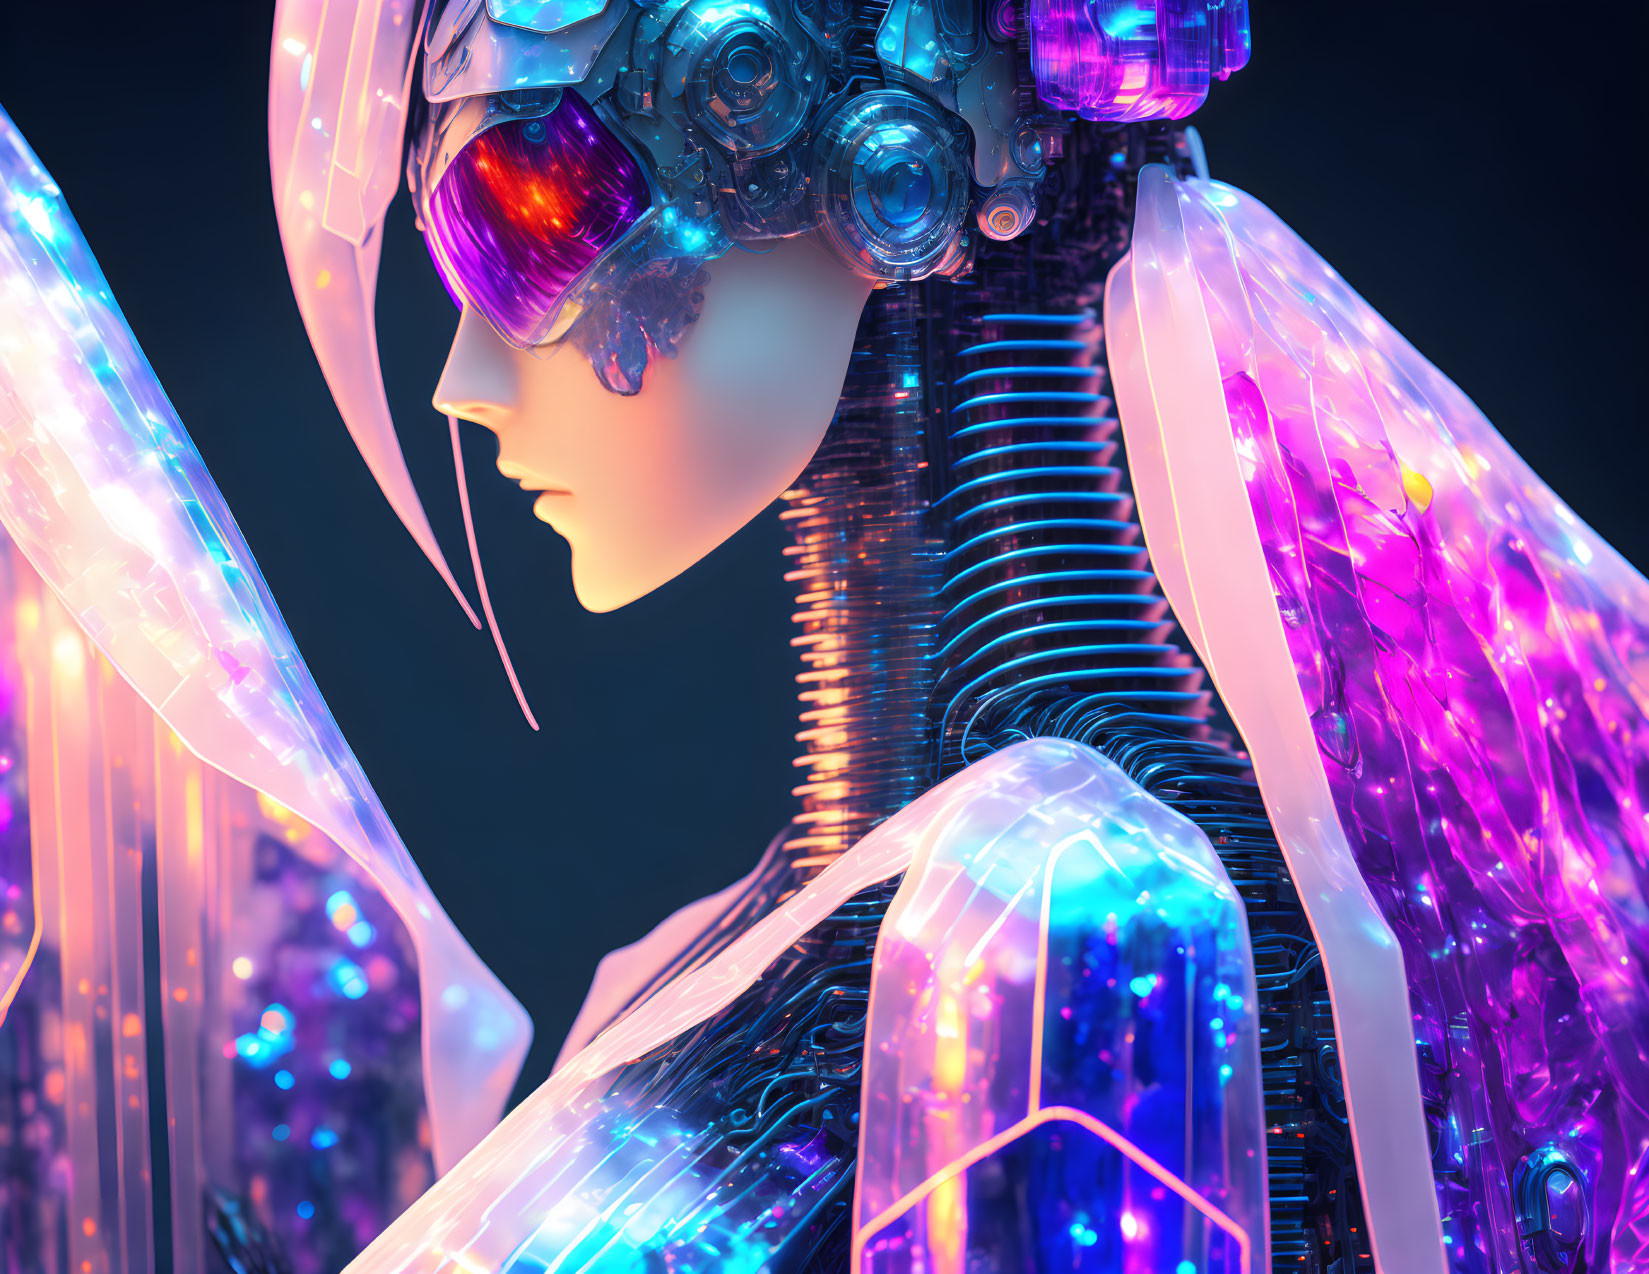 Futuristic humanoid robot with reflective goggles and neon-lit surroundings